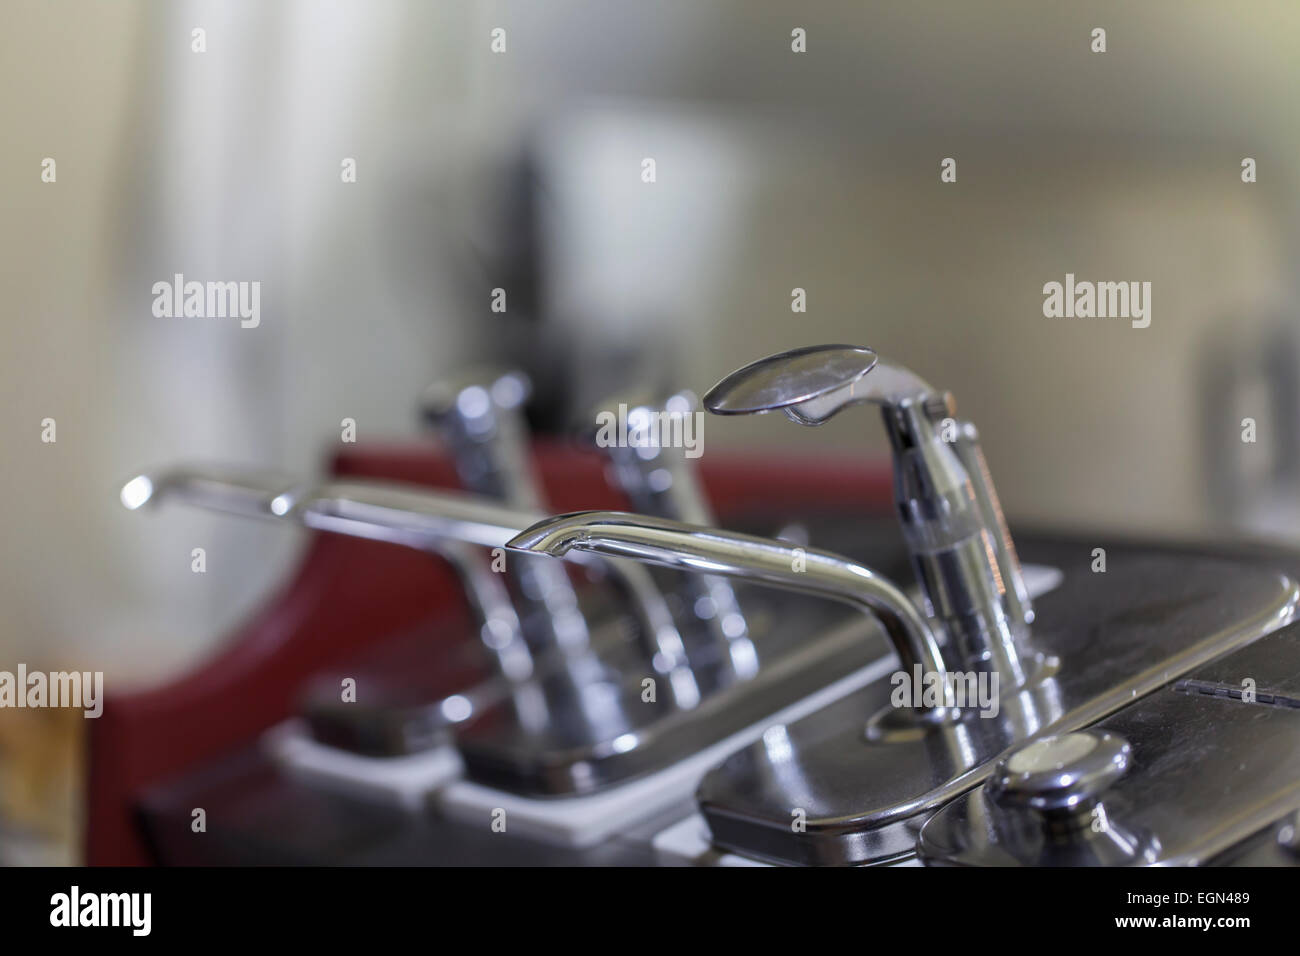 kitchen equipment abstract background close up Stock Photo